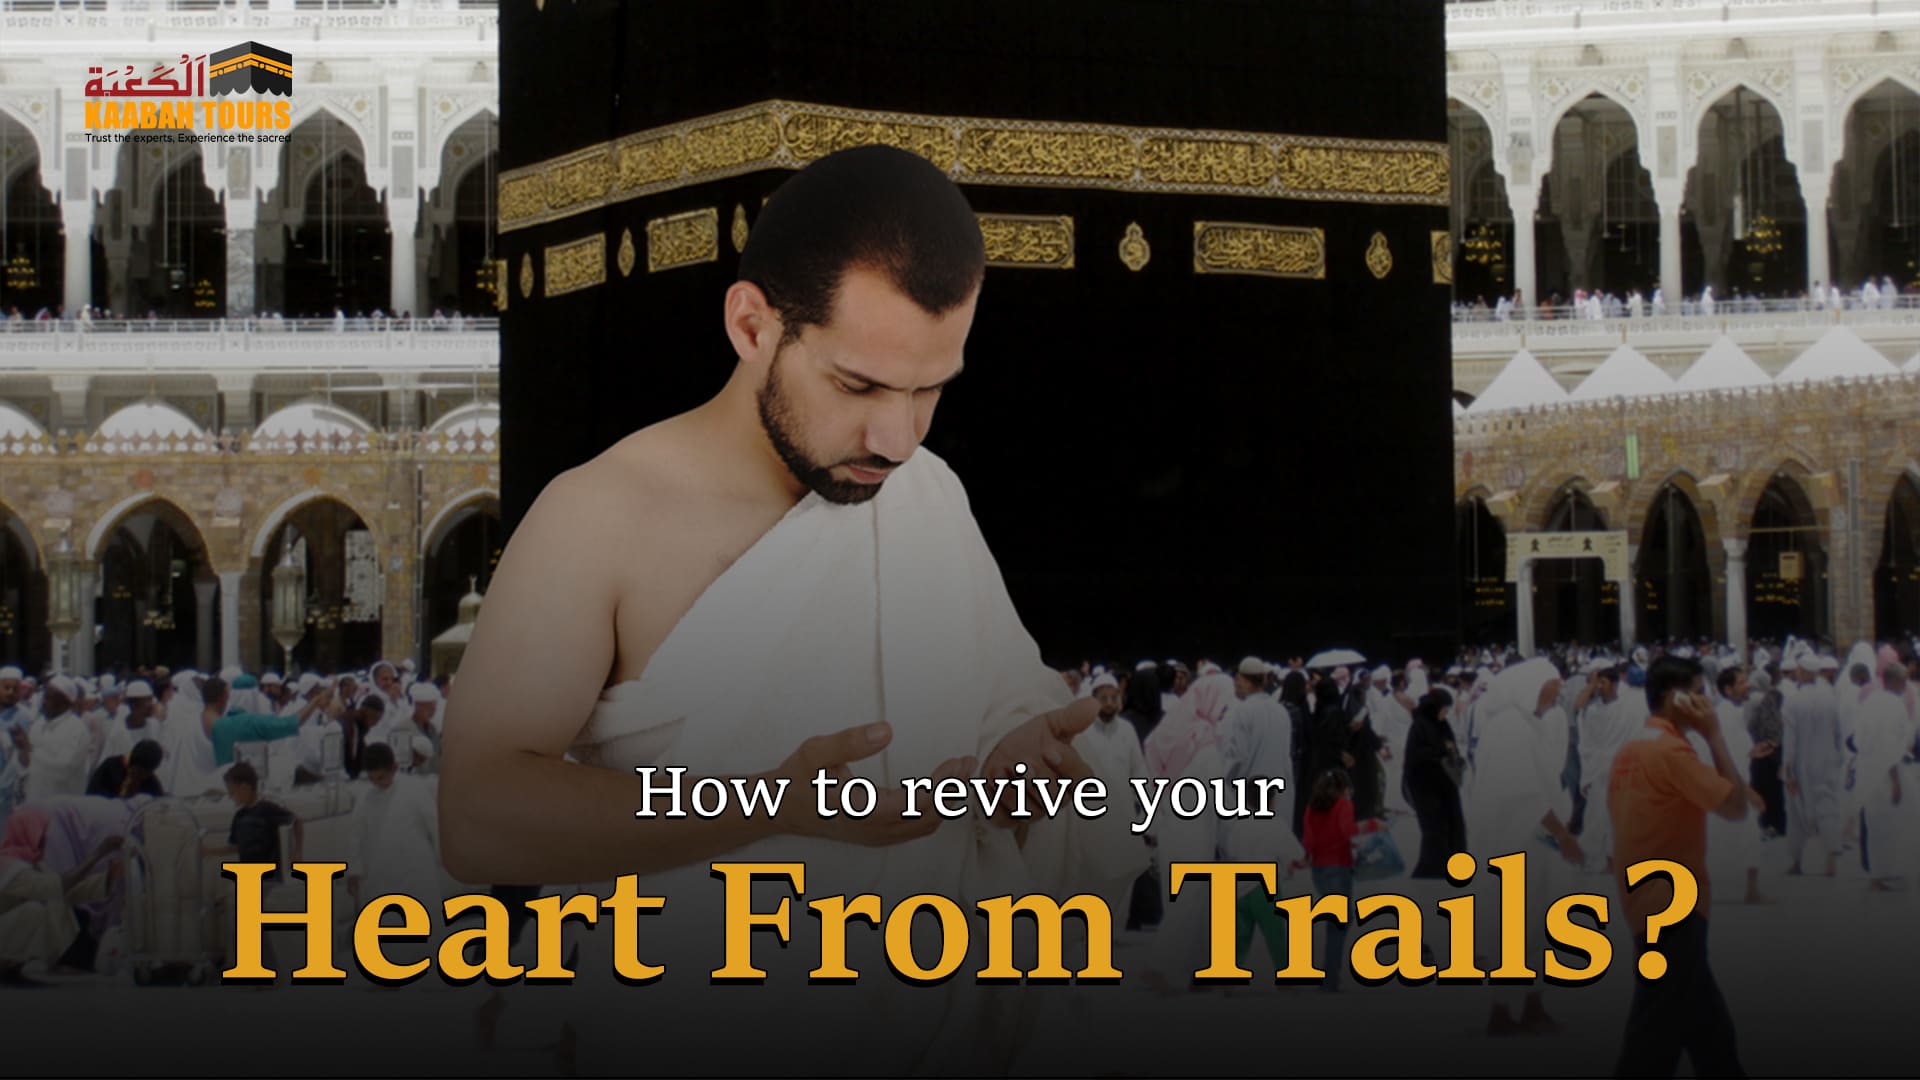 Revive your Heart from Trails